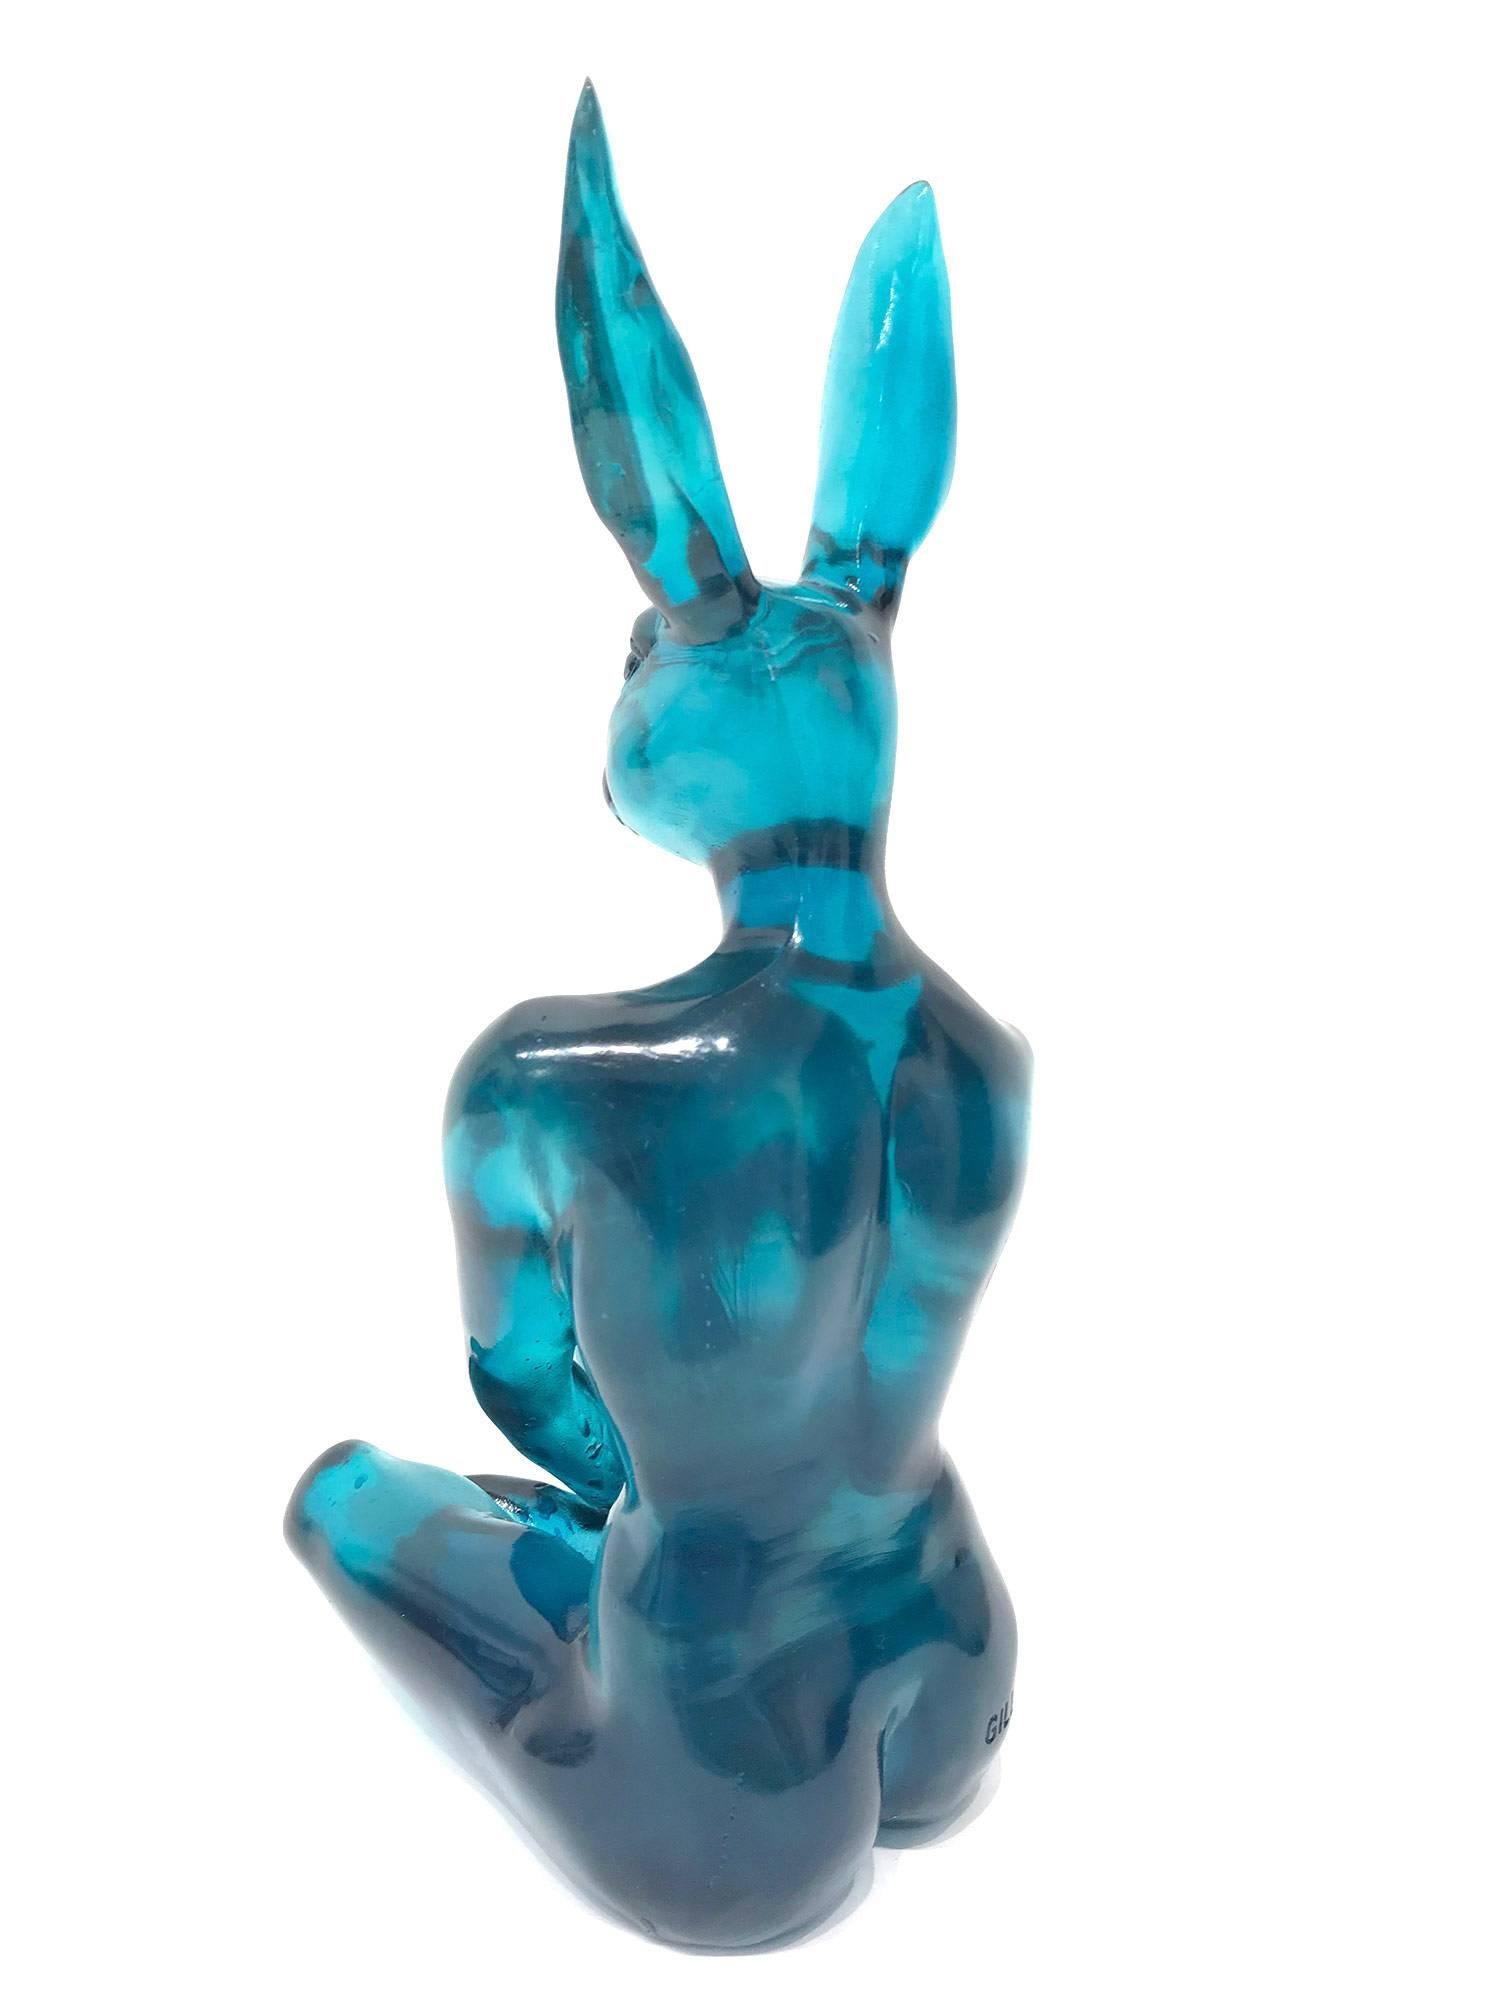 A whimsical yet very touching piece depicting the Rabbit from Gillie and Marc's iconic figures of the Dog/Bunny Human Hybrid, which has picked up much esteem across the globe. Here we find her sitting in a very sophisticated and comfortable